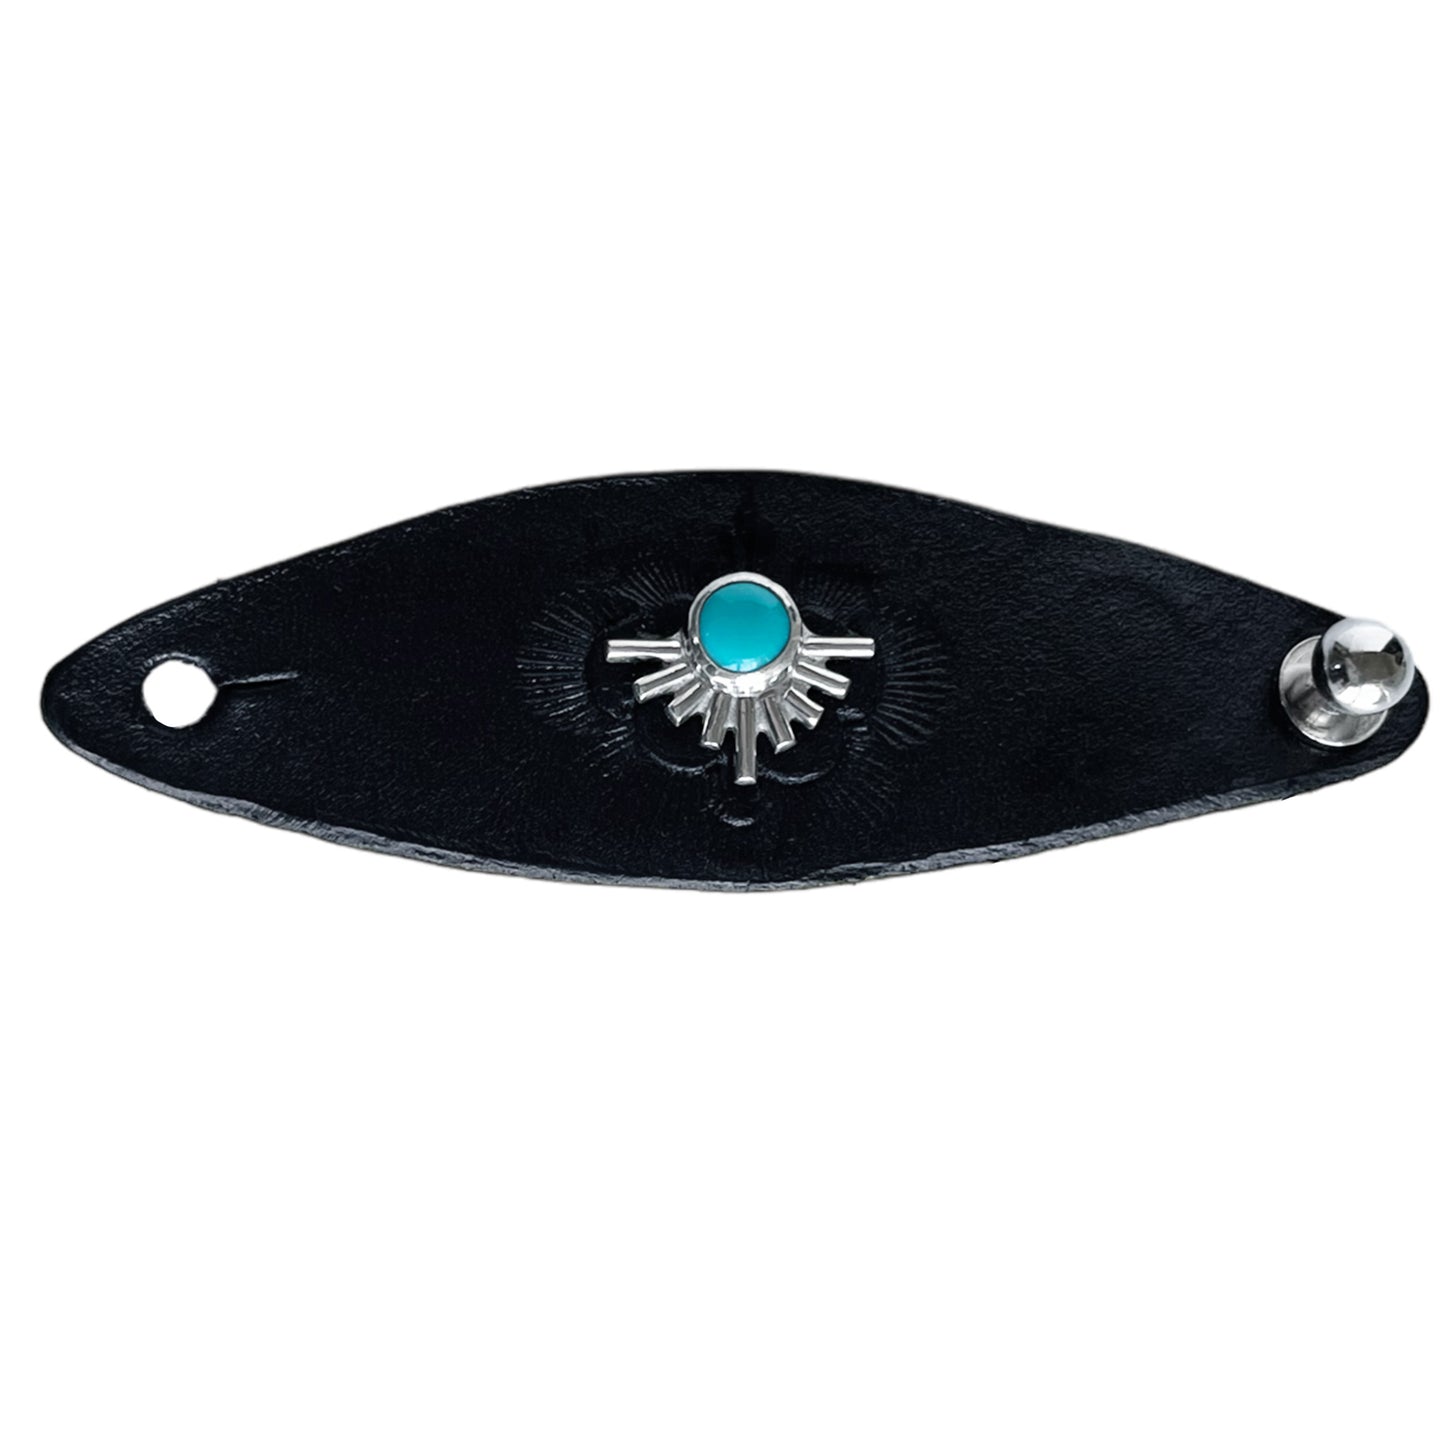 Black leather wild rag scarf slide featuring a sterling silver starburst turquoise setting in the middle. The slide is open and laying flat.